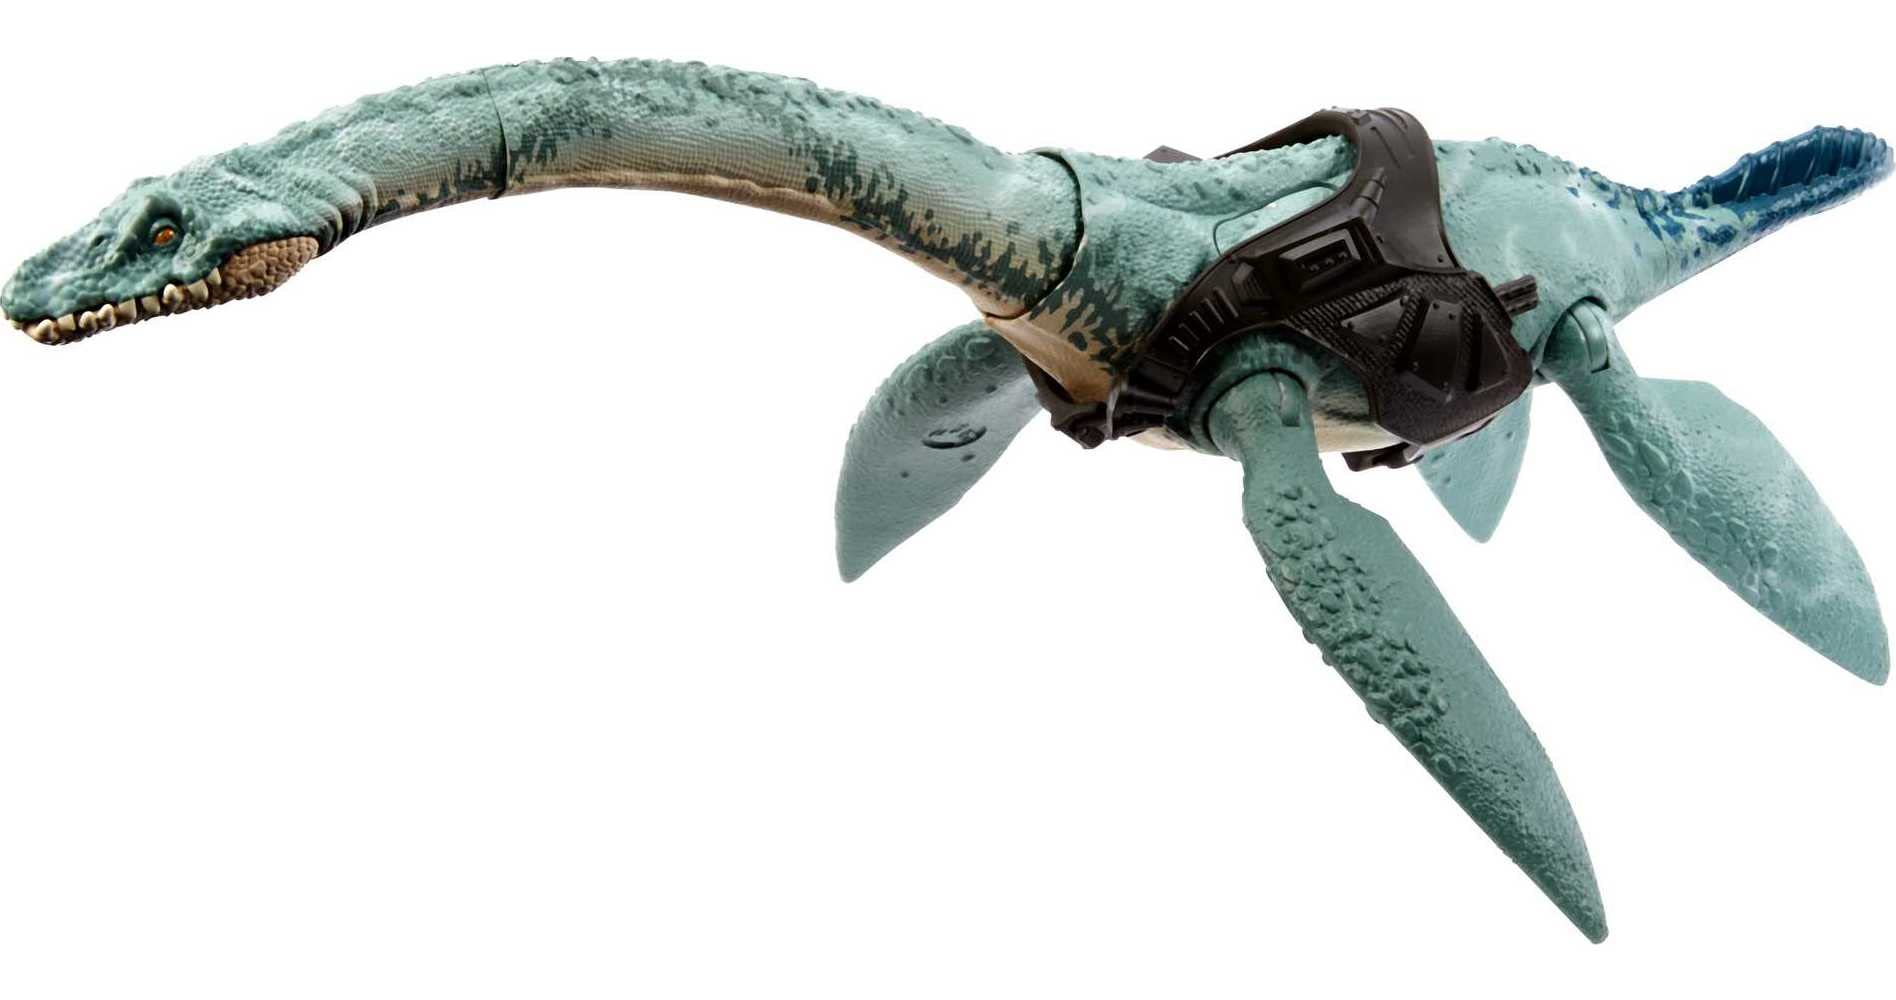 Jurassic World Dinosaur Toy, Elasmosaurus Gigantic Trackers Large Species Action Figure with Attack Motion and Tracking Gear, Digital Play